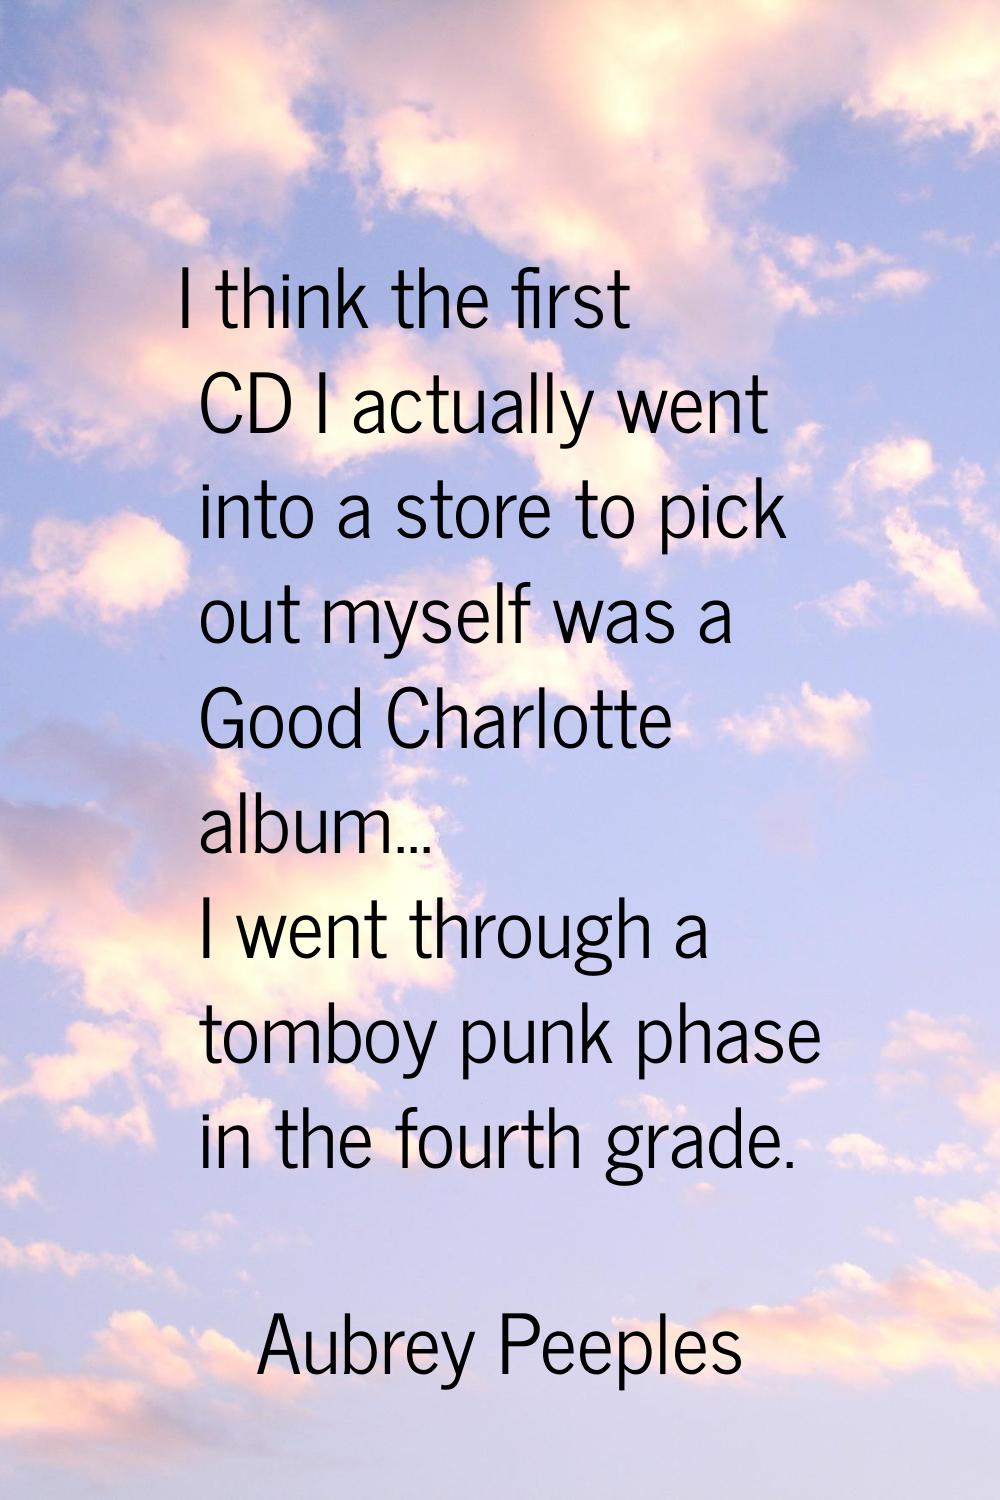 I think the first CD I actually went into a store to pick out myself was a Good Charlotte album... 